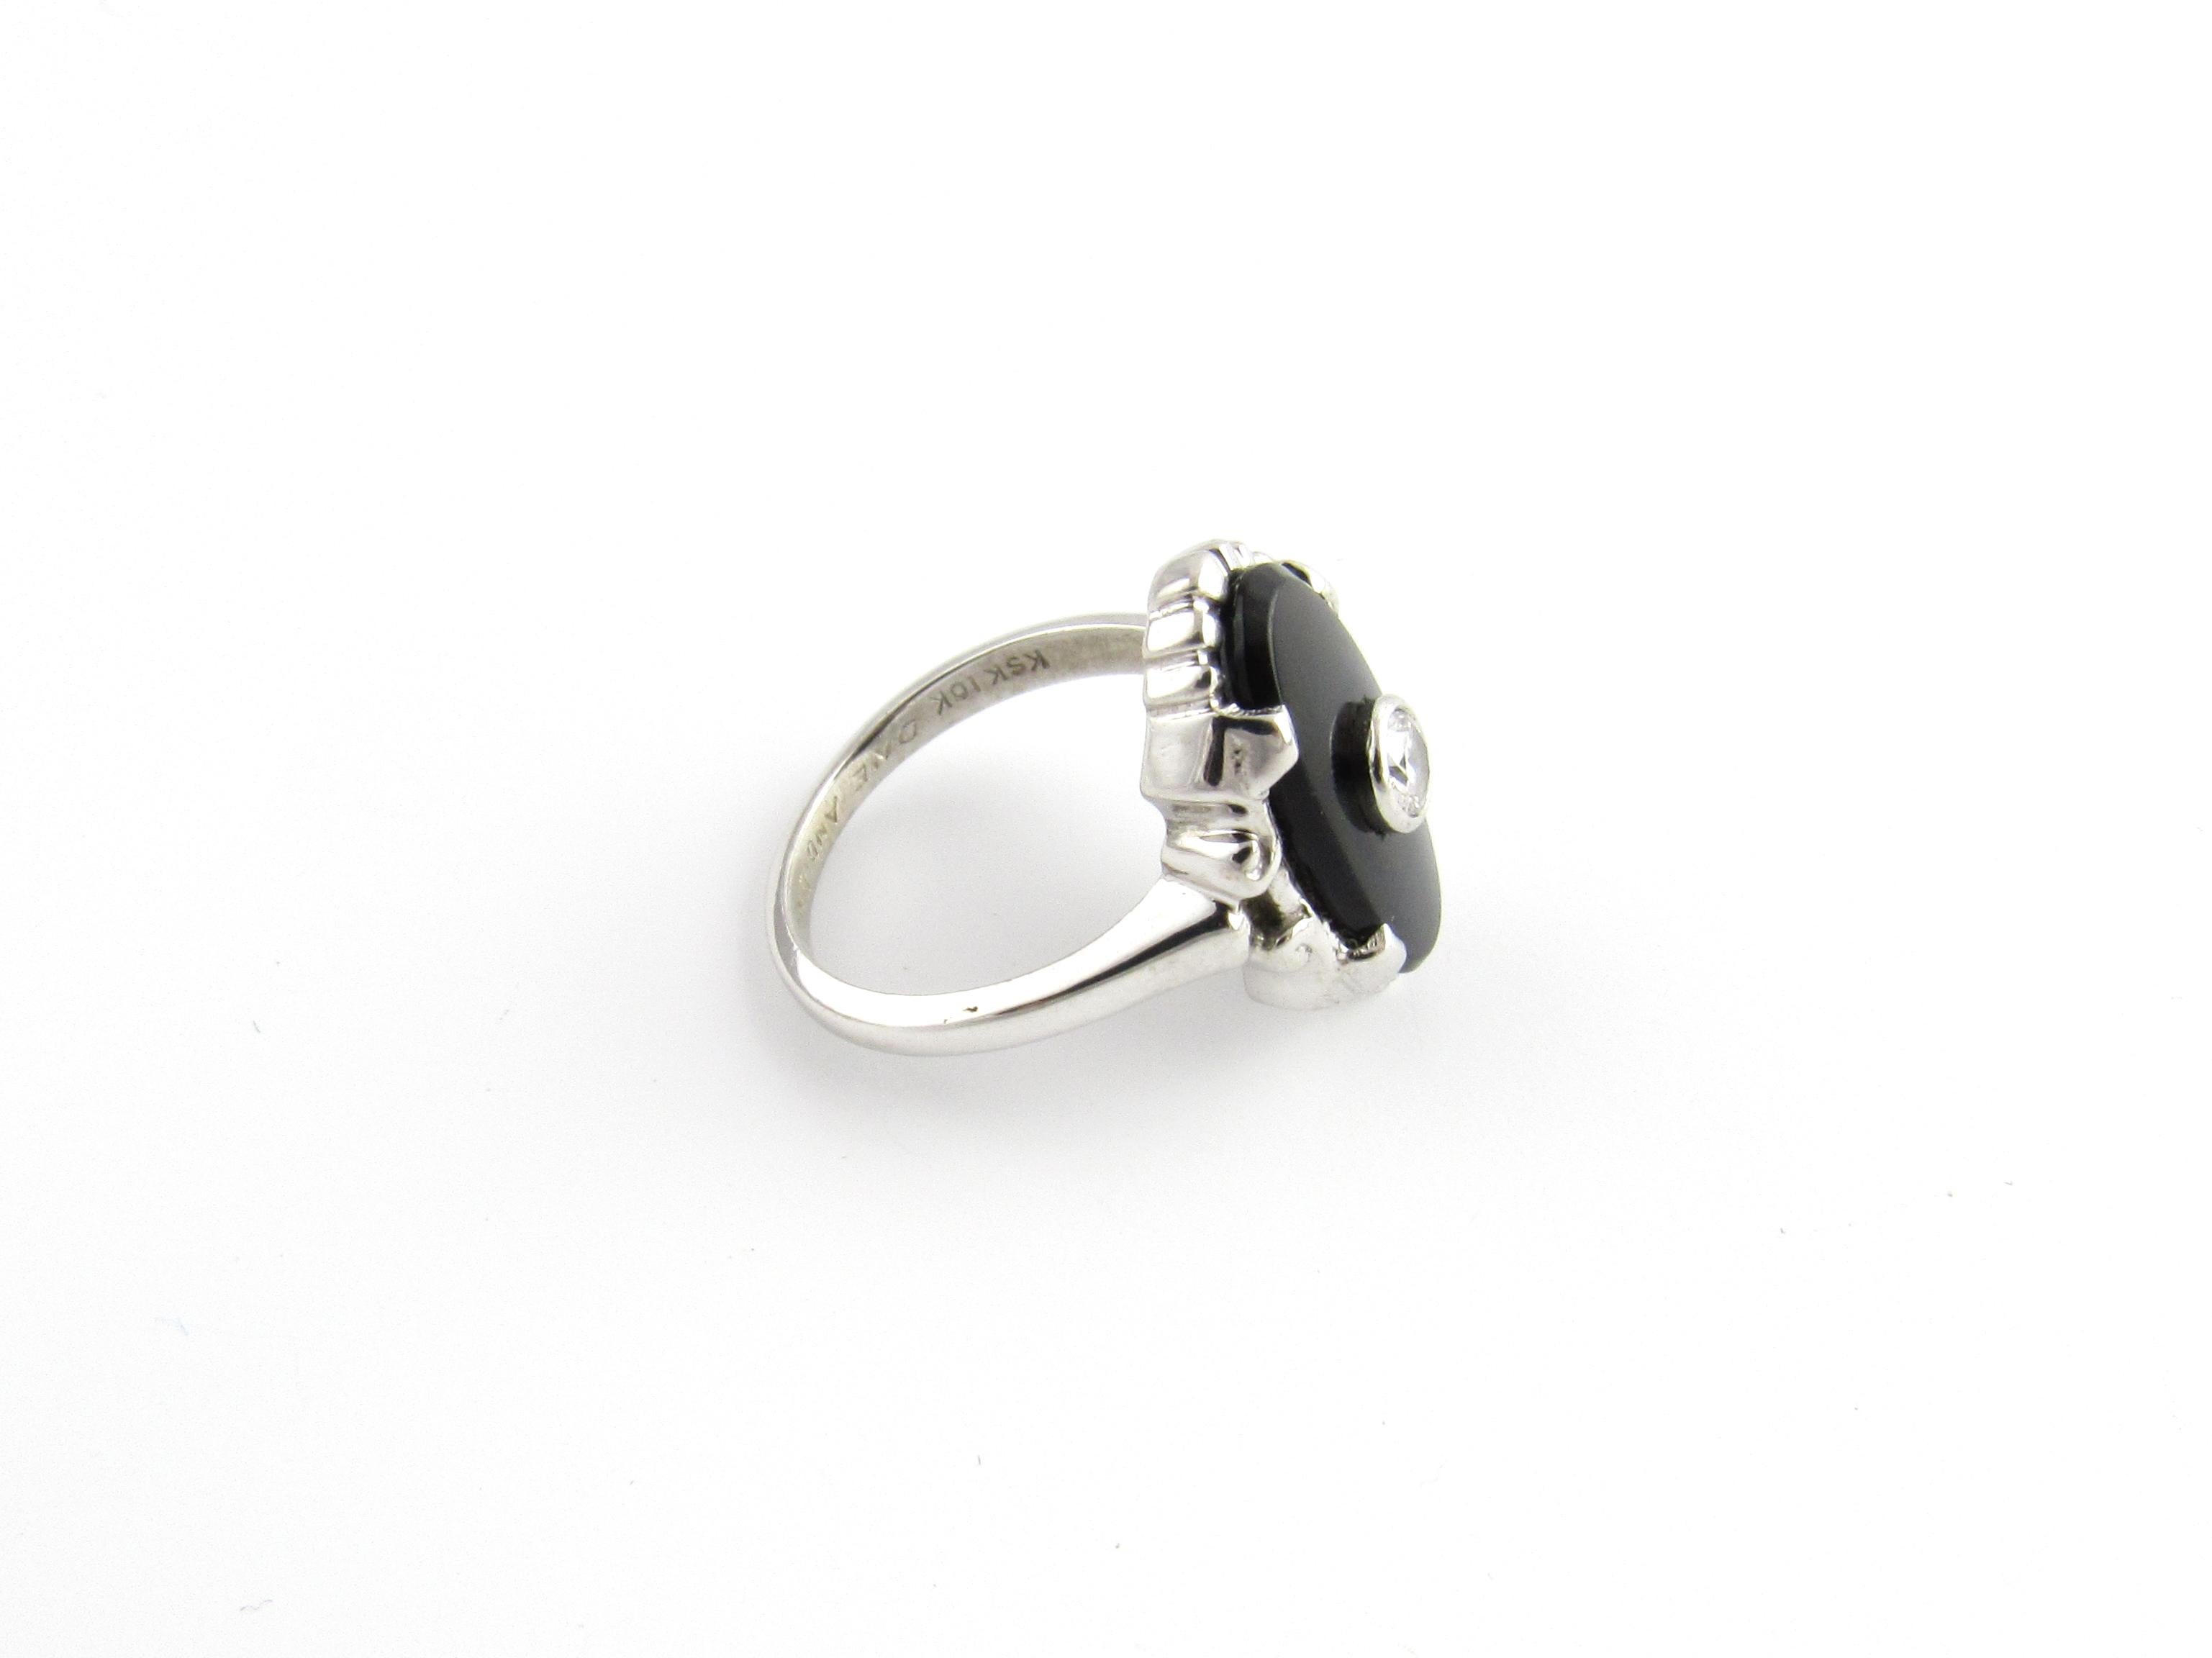 Vintage 10 Karat White Gold Onyx and Diamond Ring Size 5.5

This lovely ring features one oval onyx and one round brilliant cut diamond set in beautifully detailed 10K white gold. Top of ring measures 18 mm x 12 mm. Shank measures 2 mm. Monogram